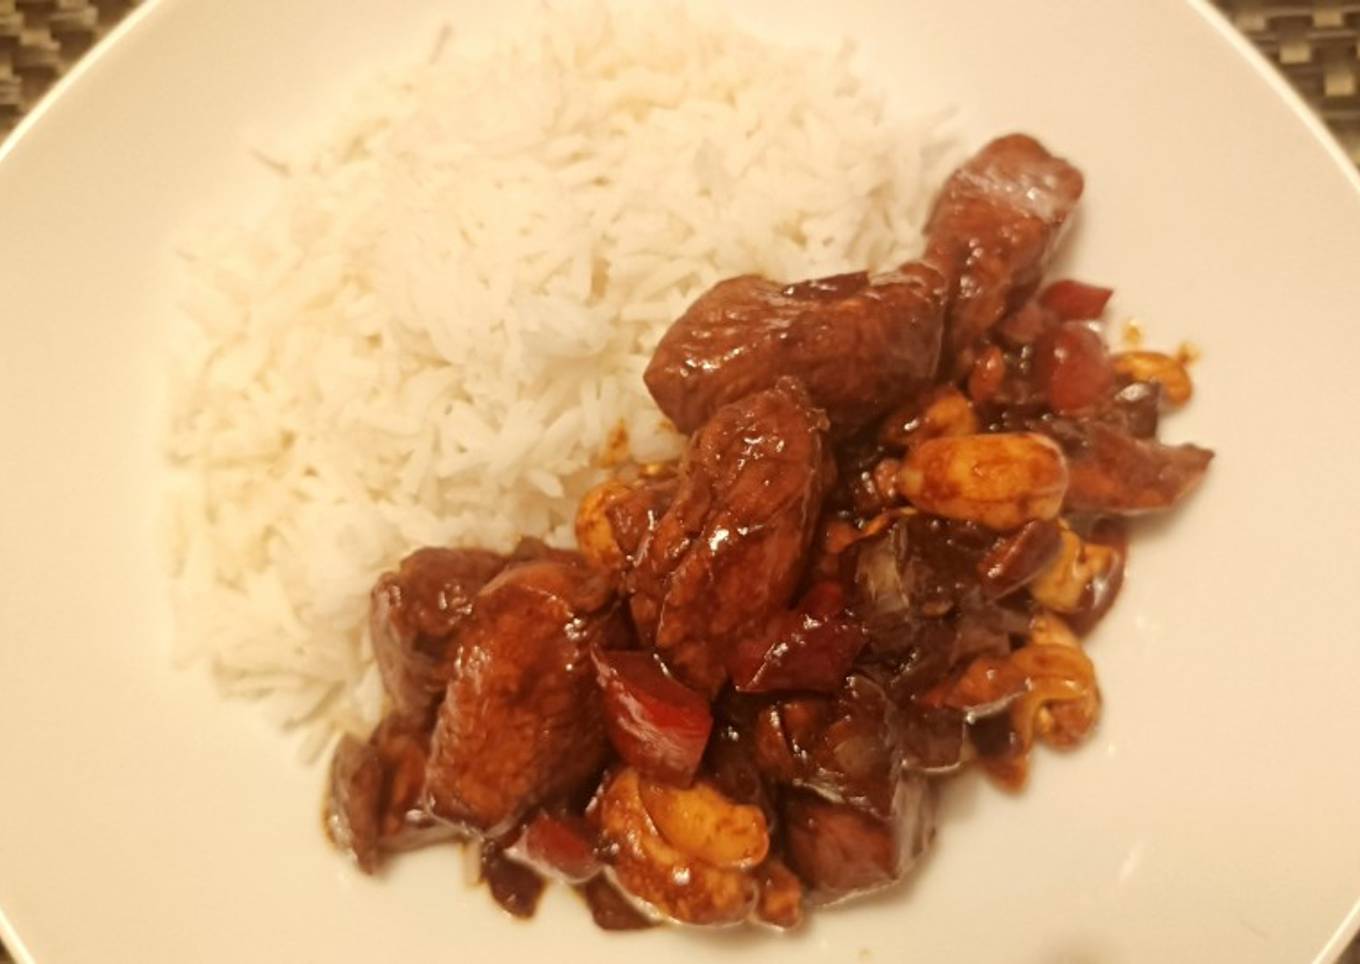 Fluffy's attempt at Kung pao chicken